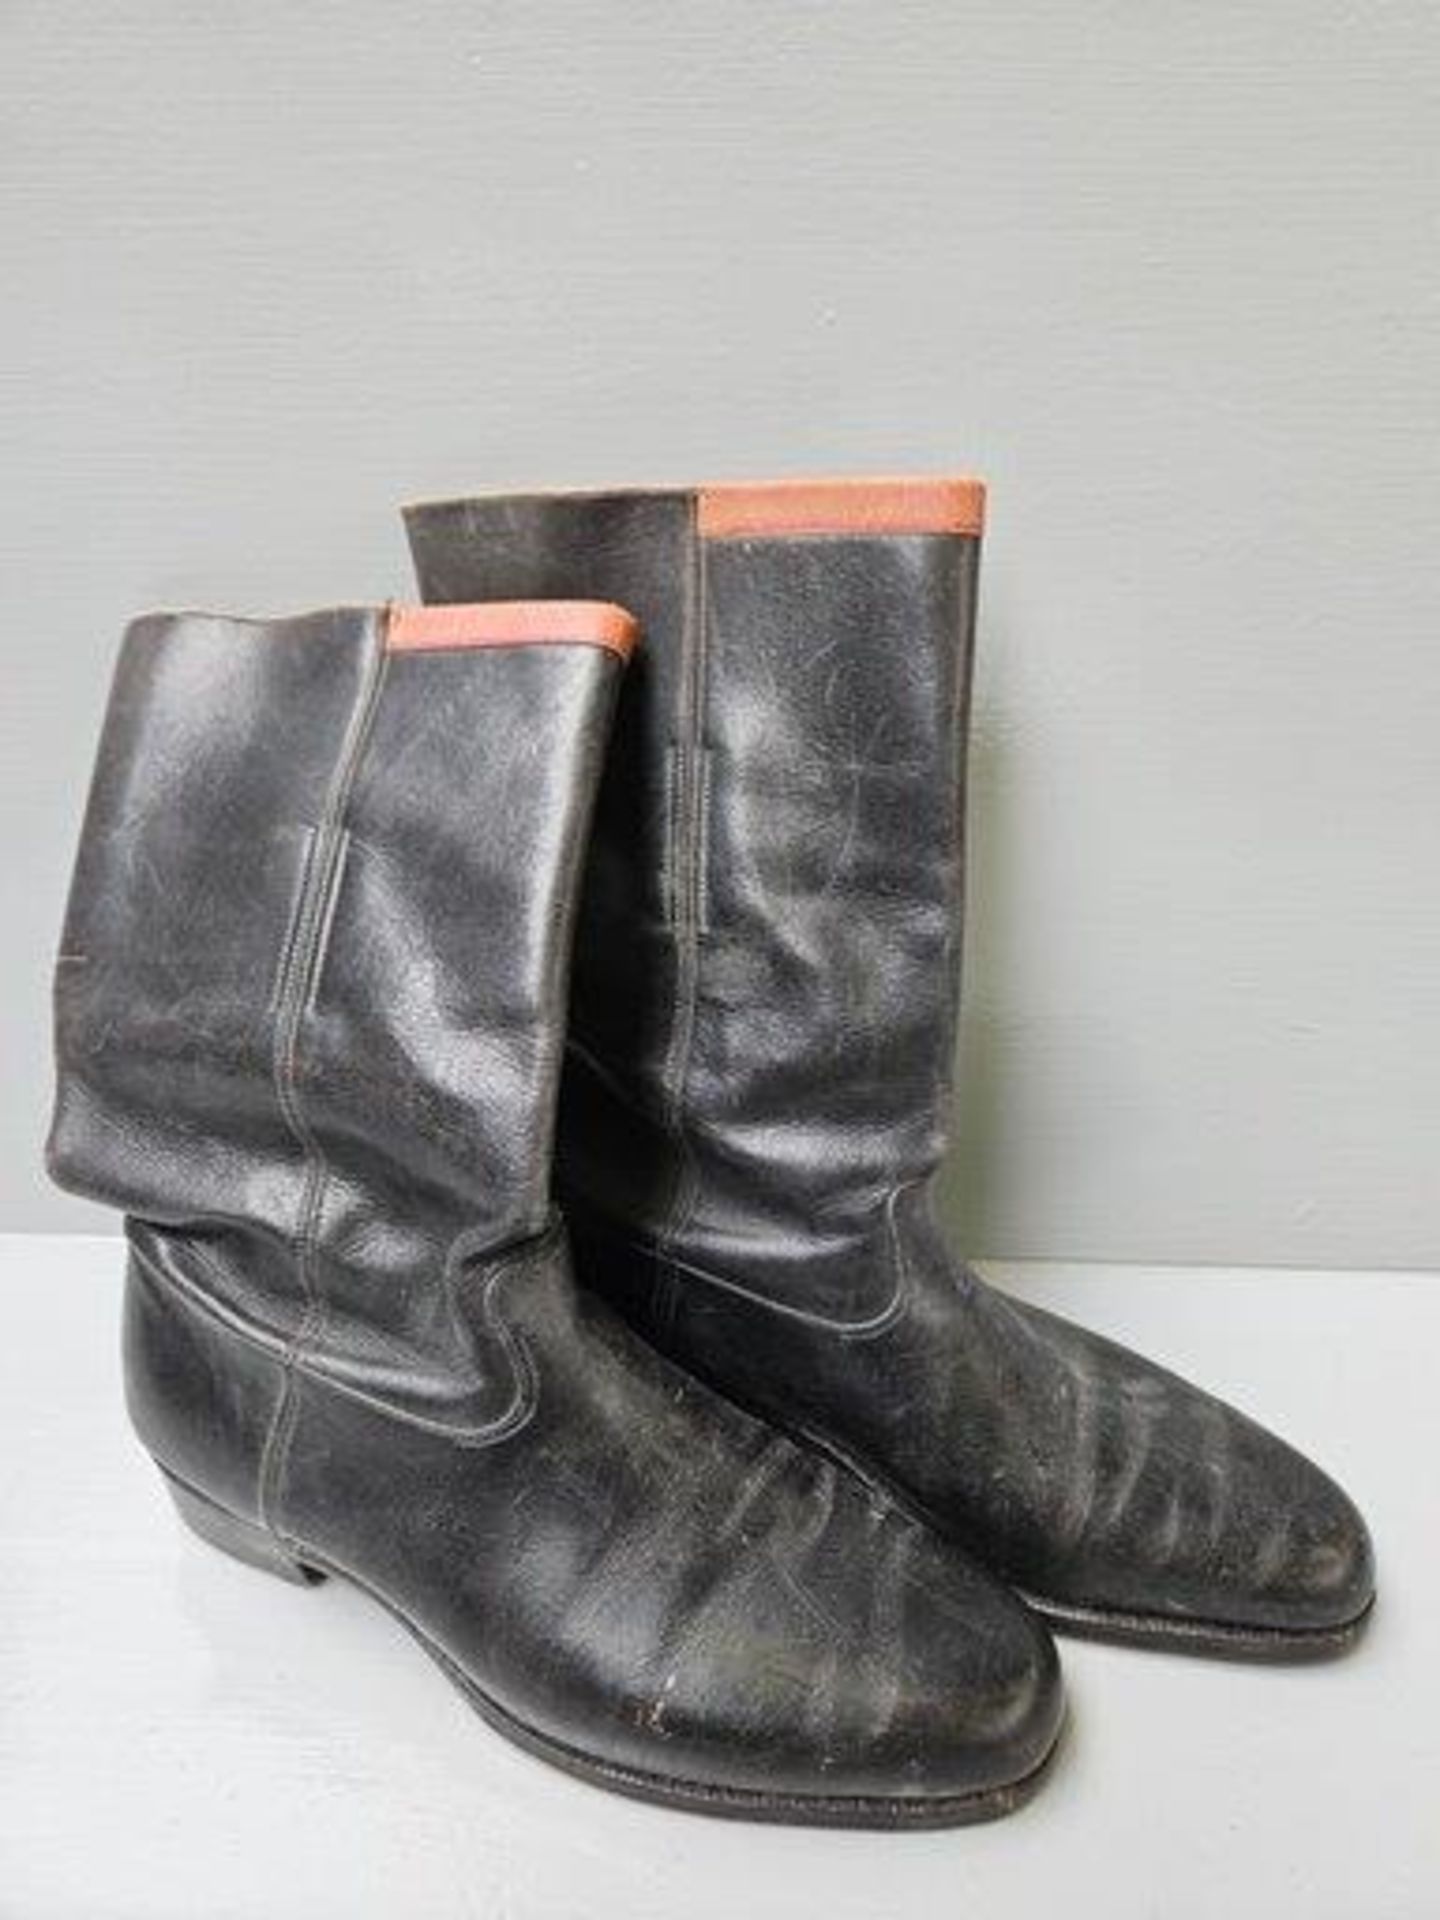 A Pair Of Black Leather Boots & Trees